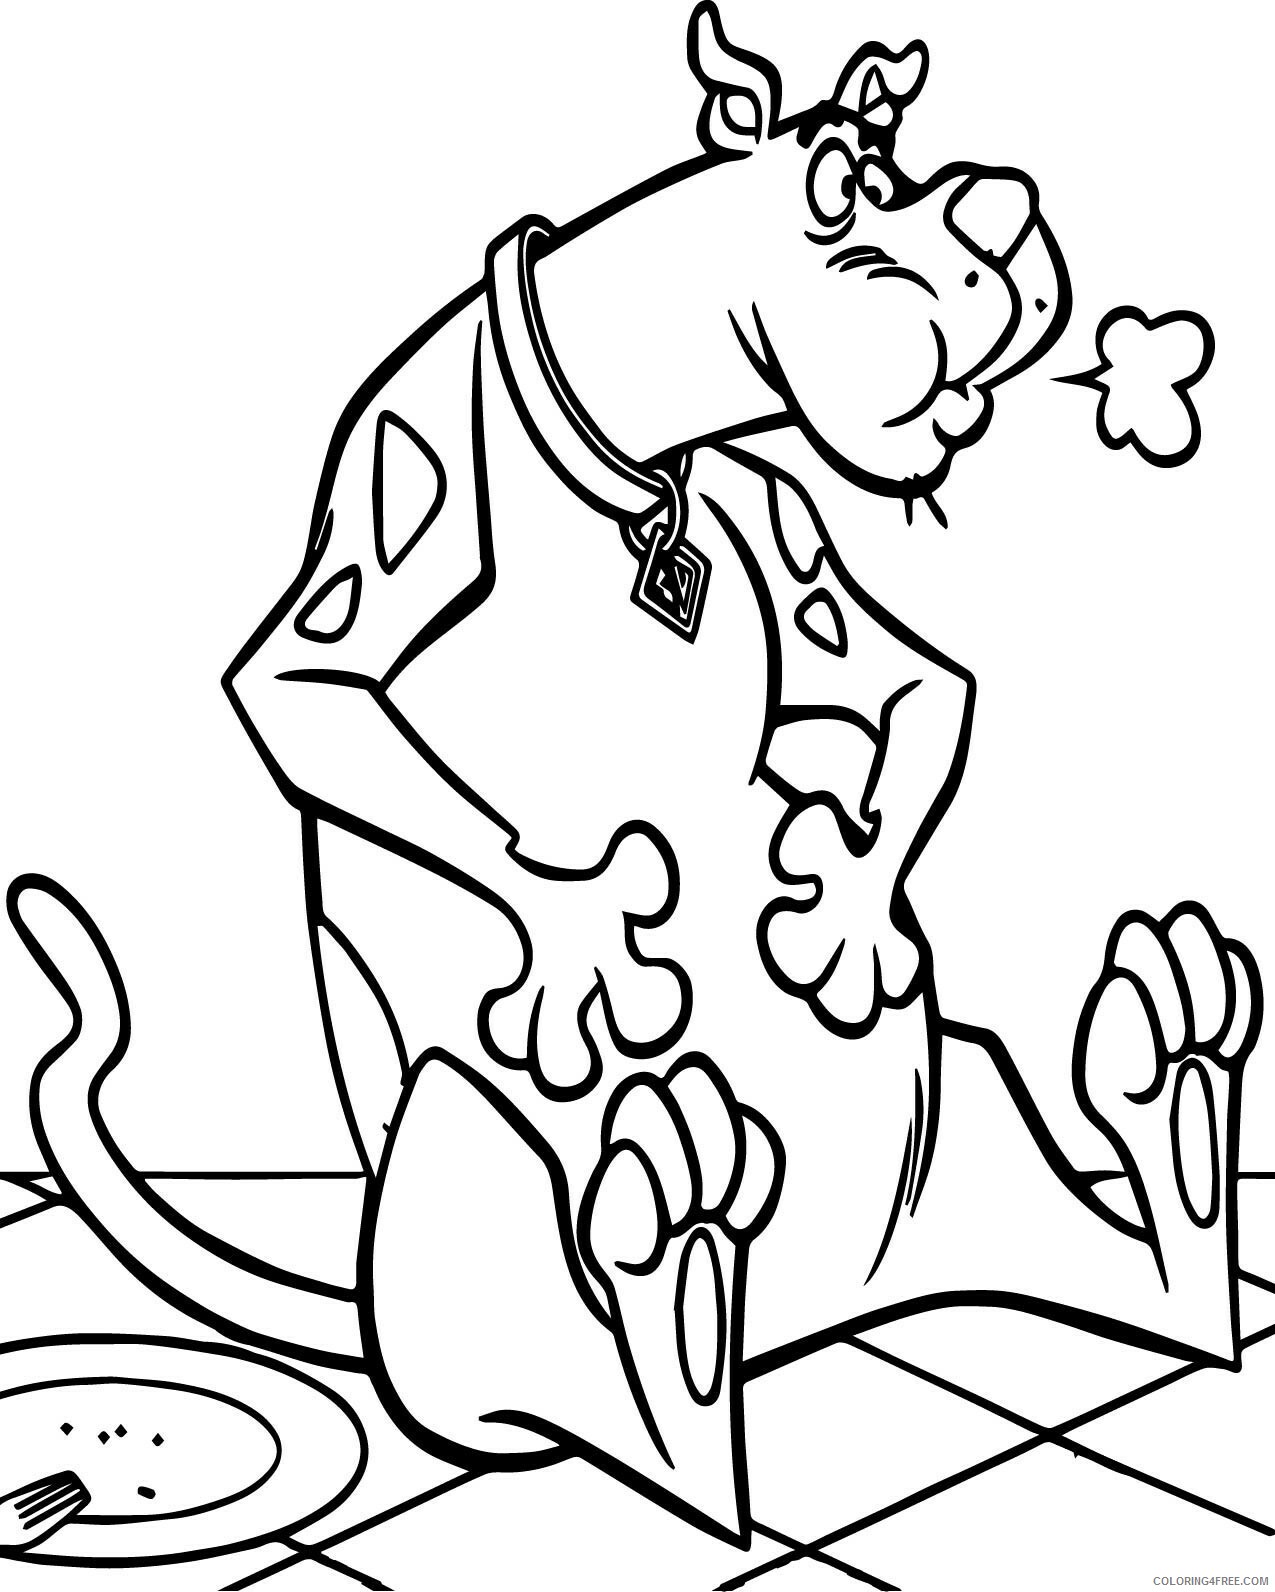 Scooby Doo Coloring Pages TV Film pictures to colour Printable 2020 01 Coloring4free